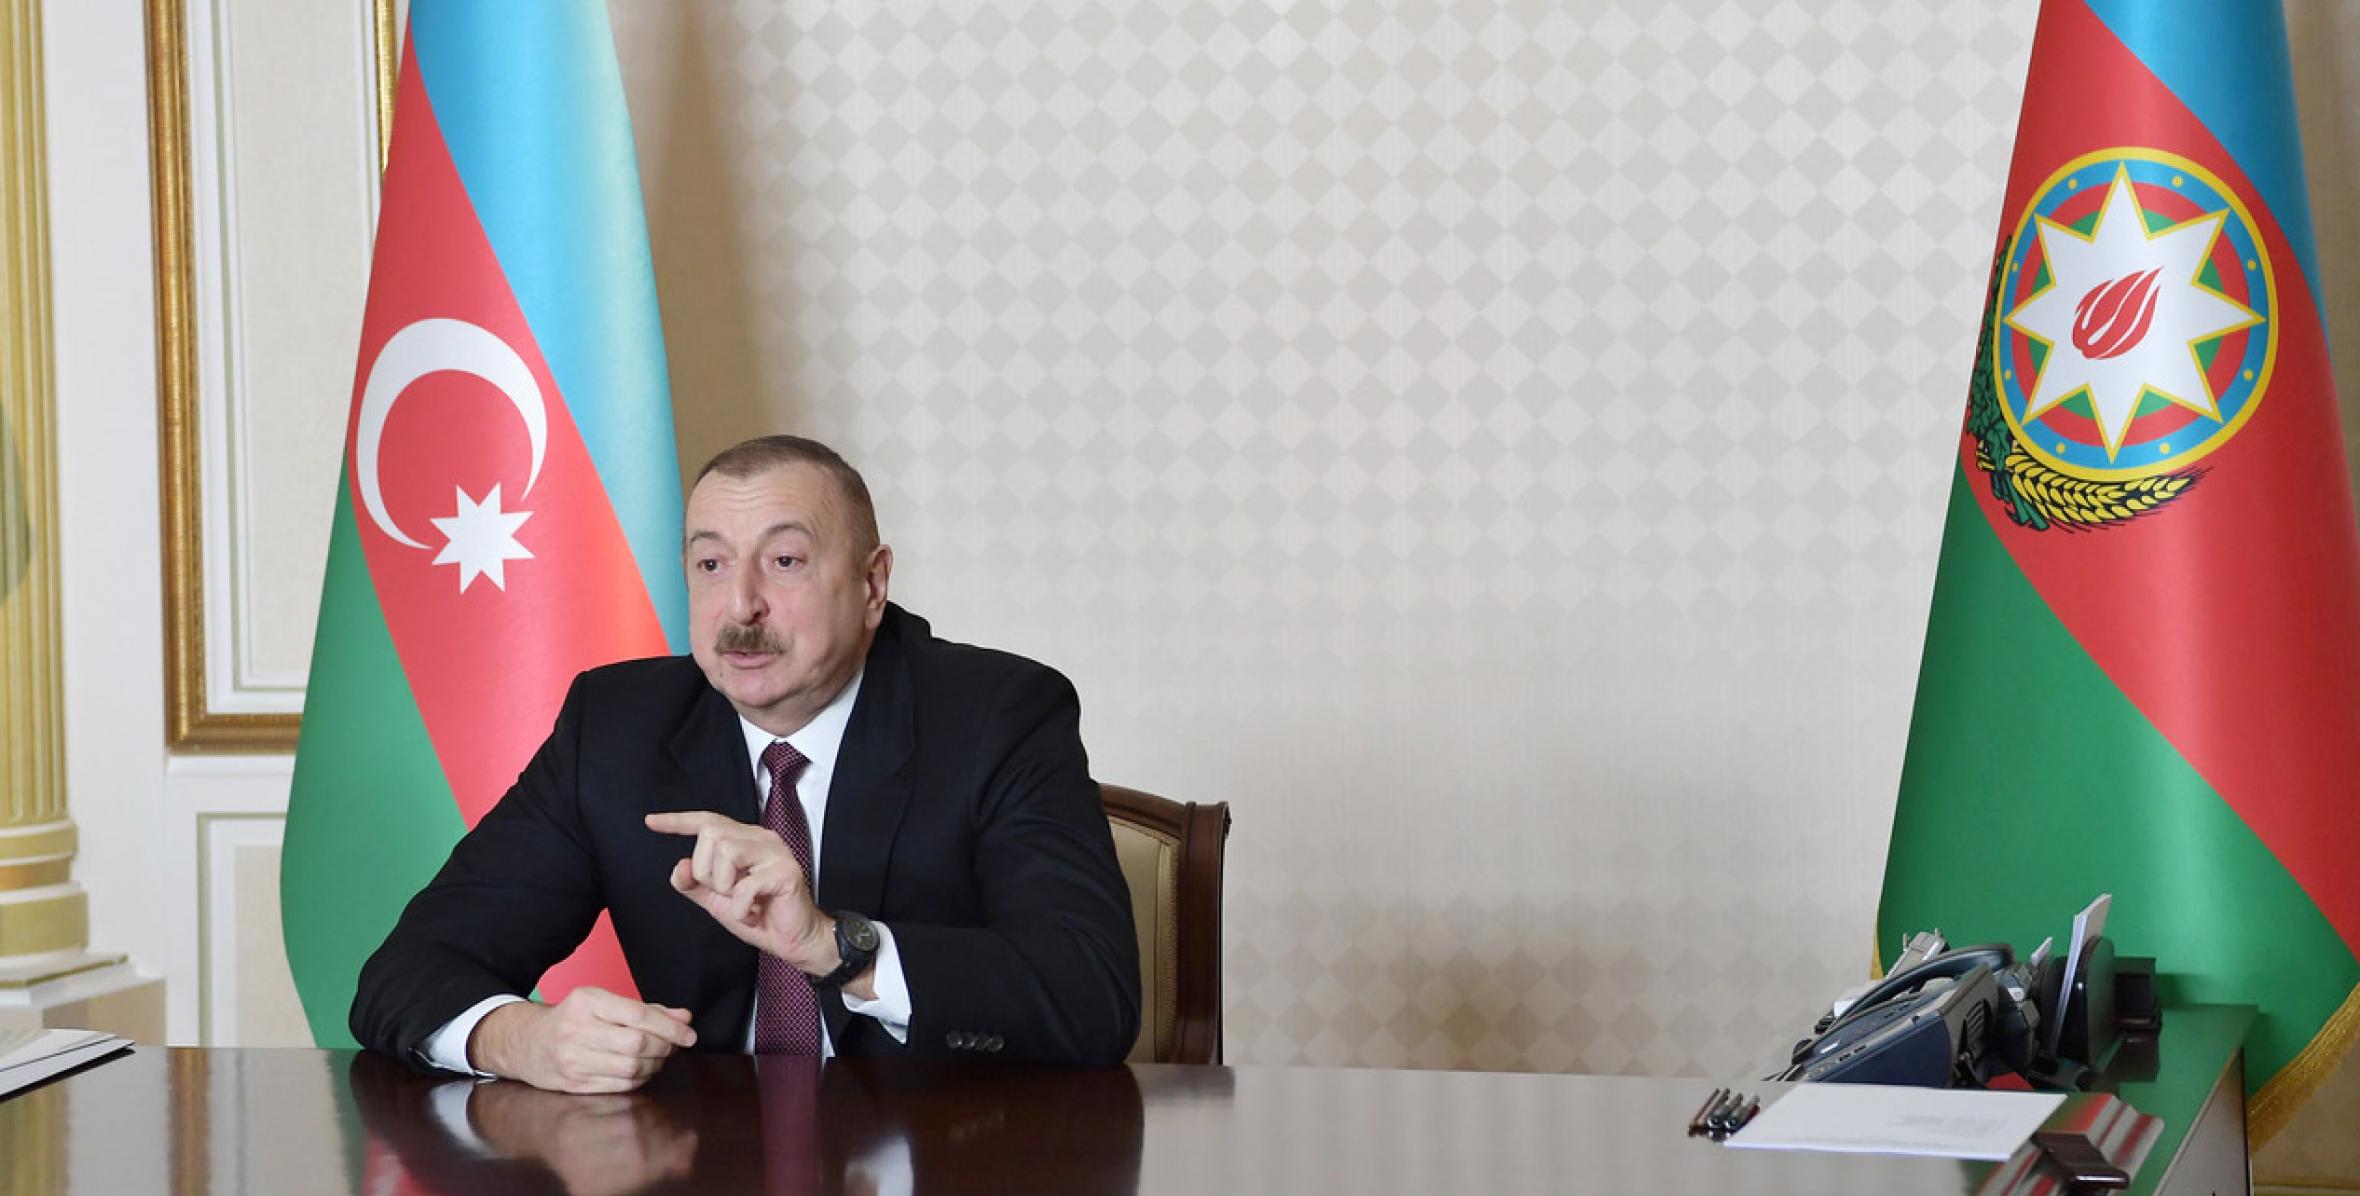 Closing speech by Ilham Aliyev at the meeting on the socio-economic results of the first quarter of 2020 through videoconference